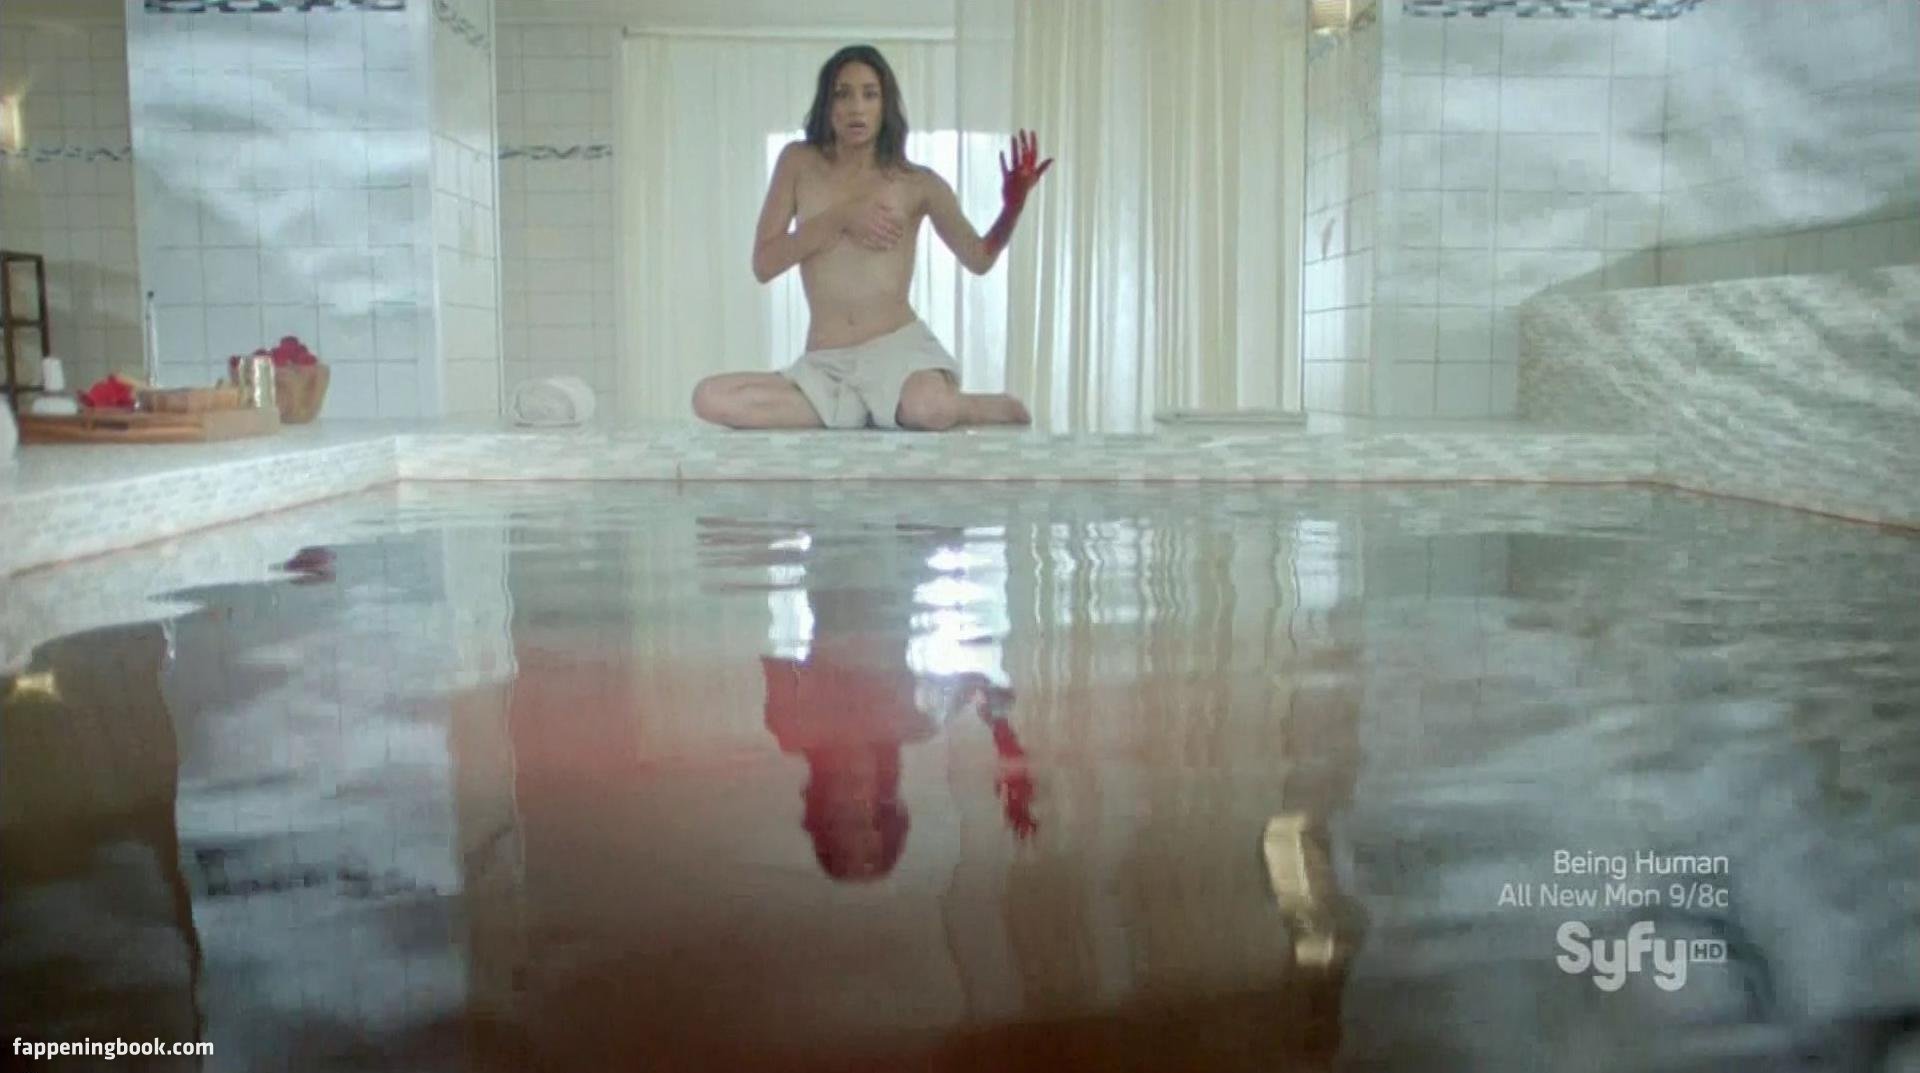 Meaghan Rath Nude, The Fappening - Photo #376820 - FappeningBook.